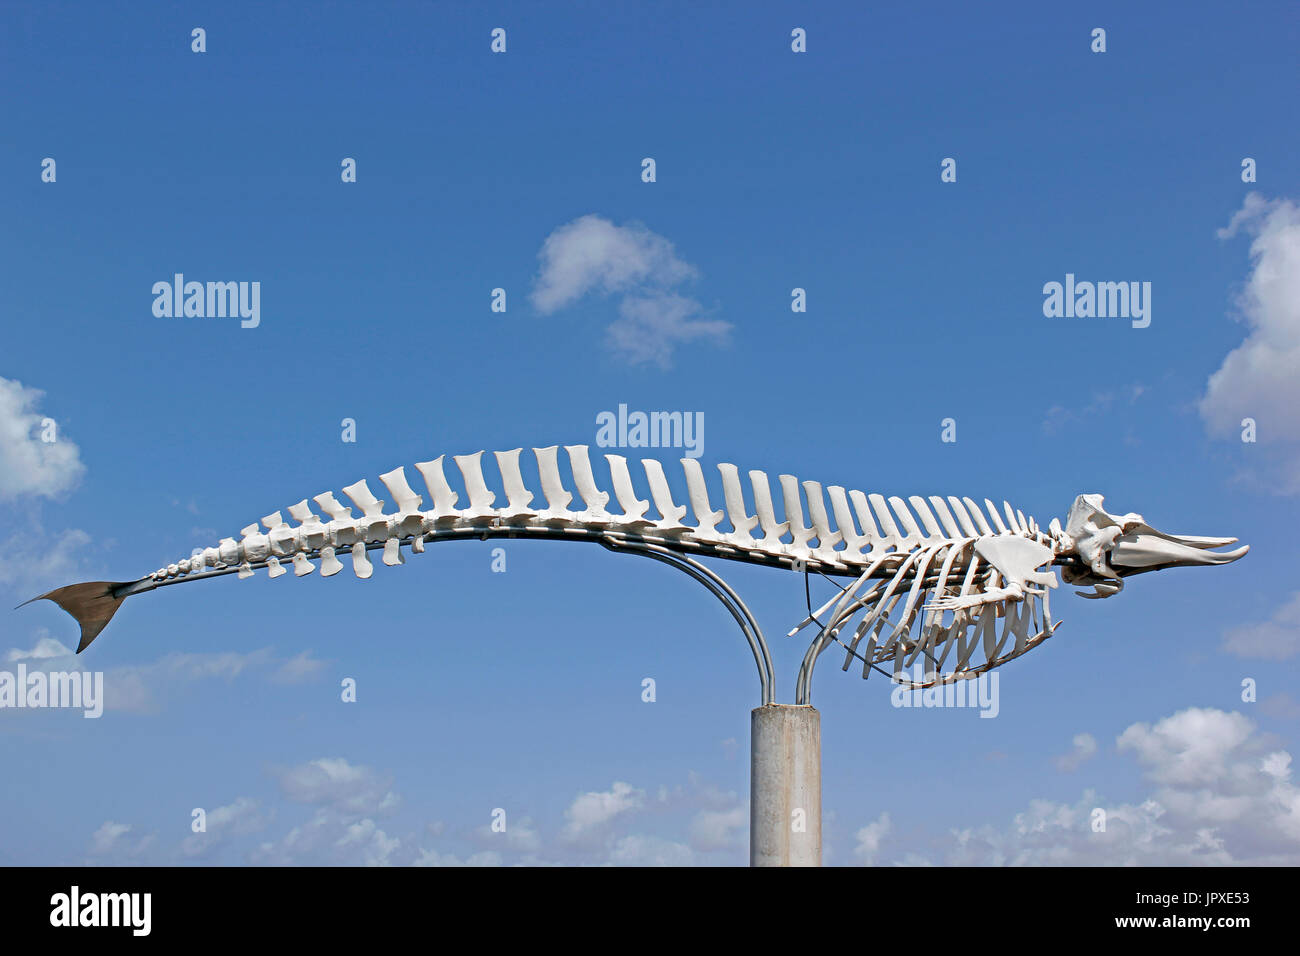 An adult female Cuvier's beaked whale skeleton at El Cotillo, Fuerteventura, Canary Islands, Spain Stock Photo